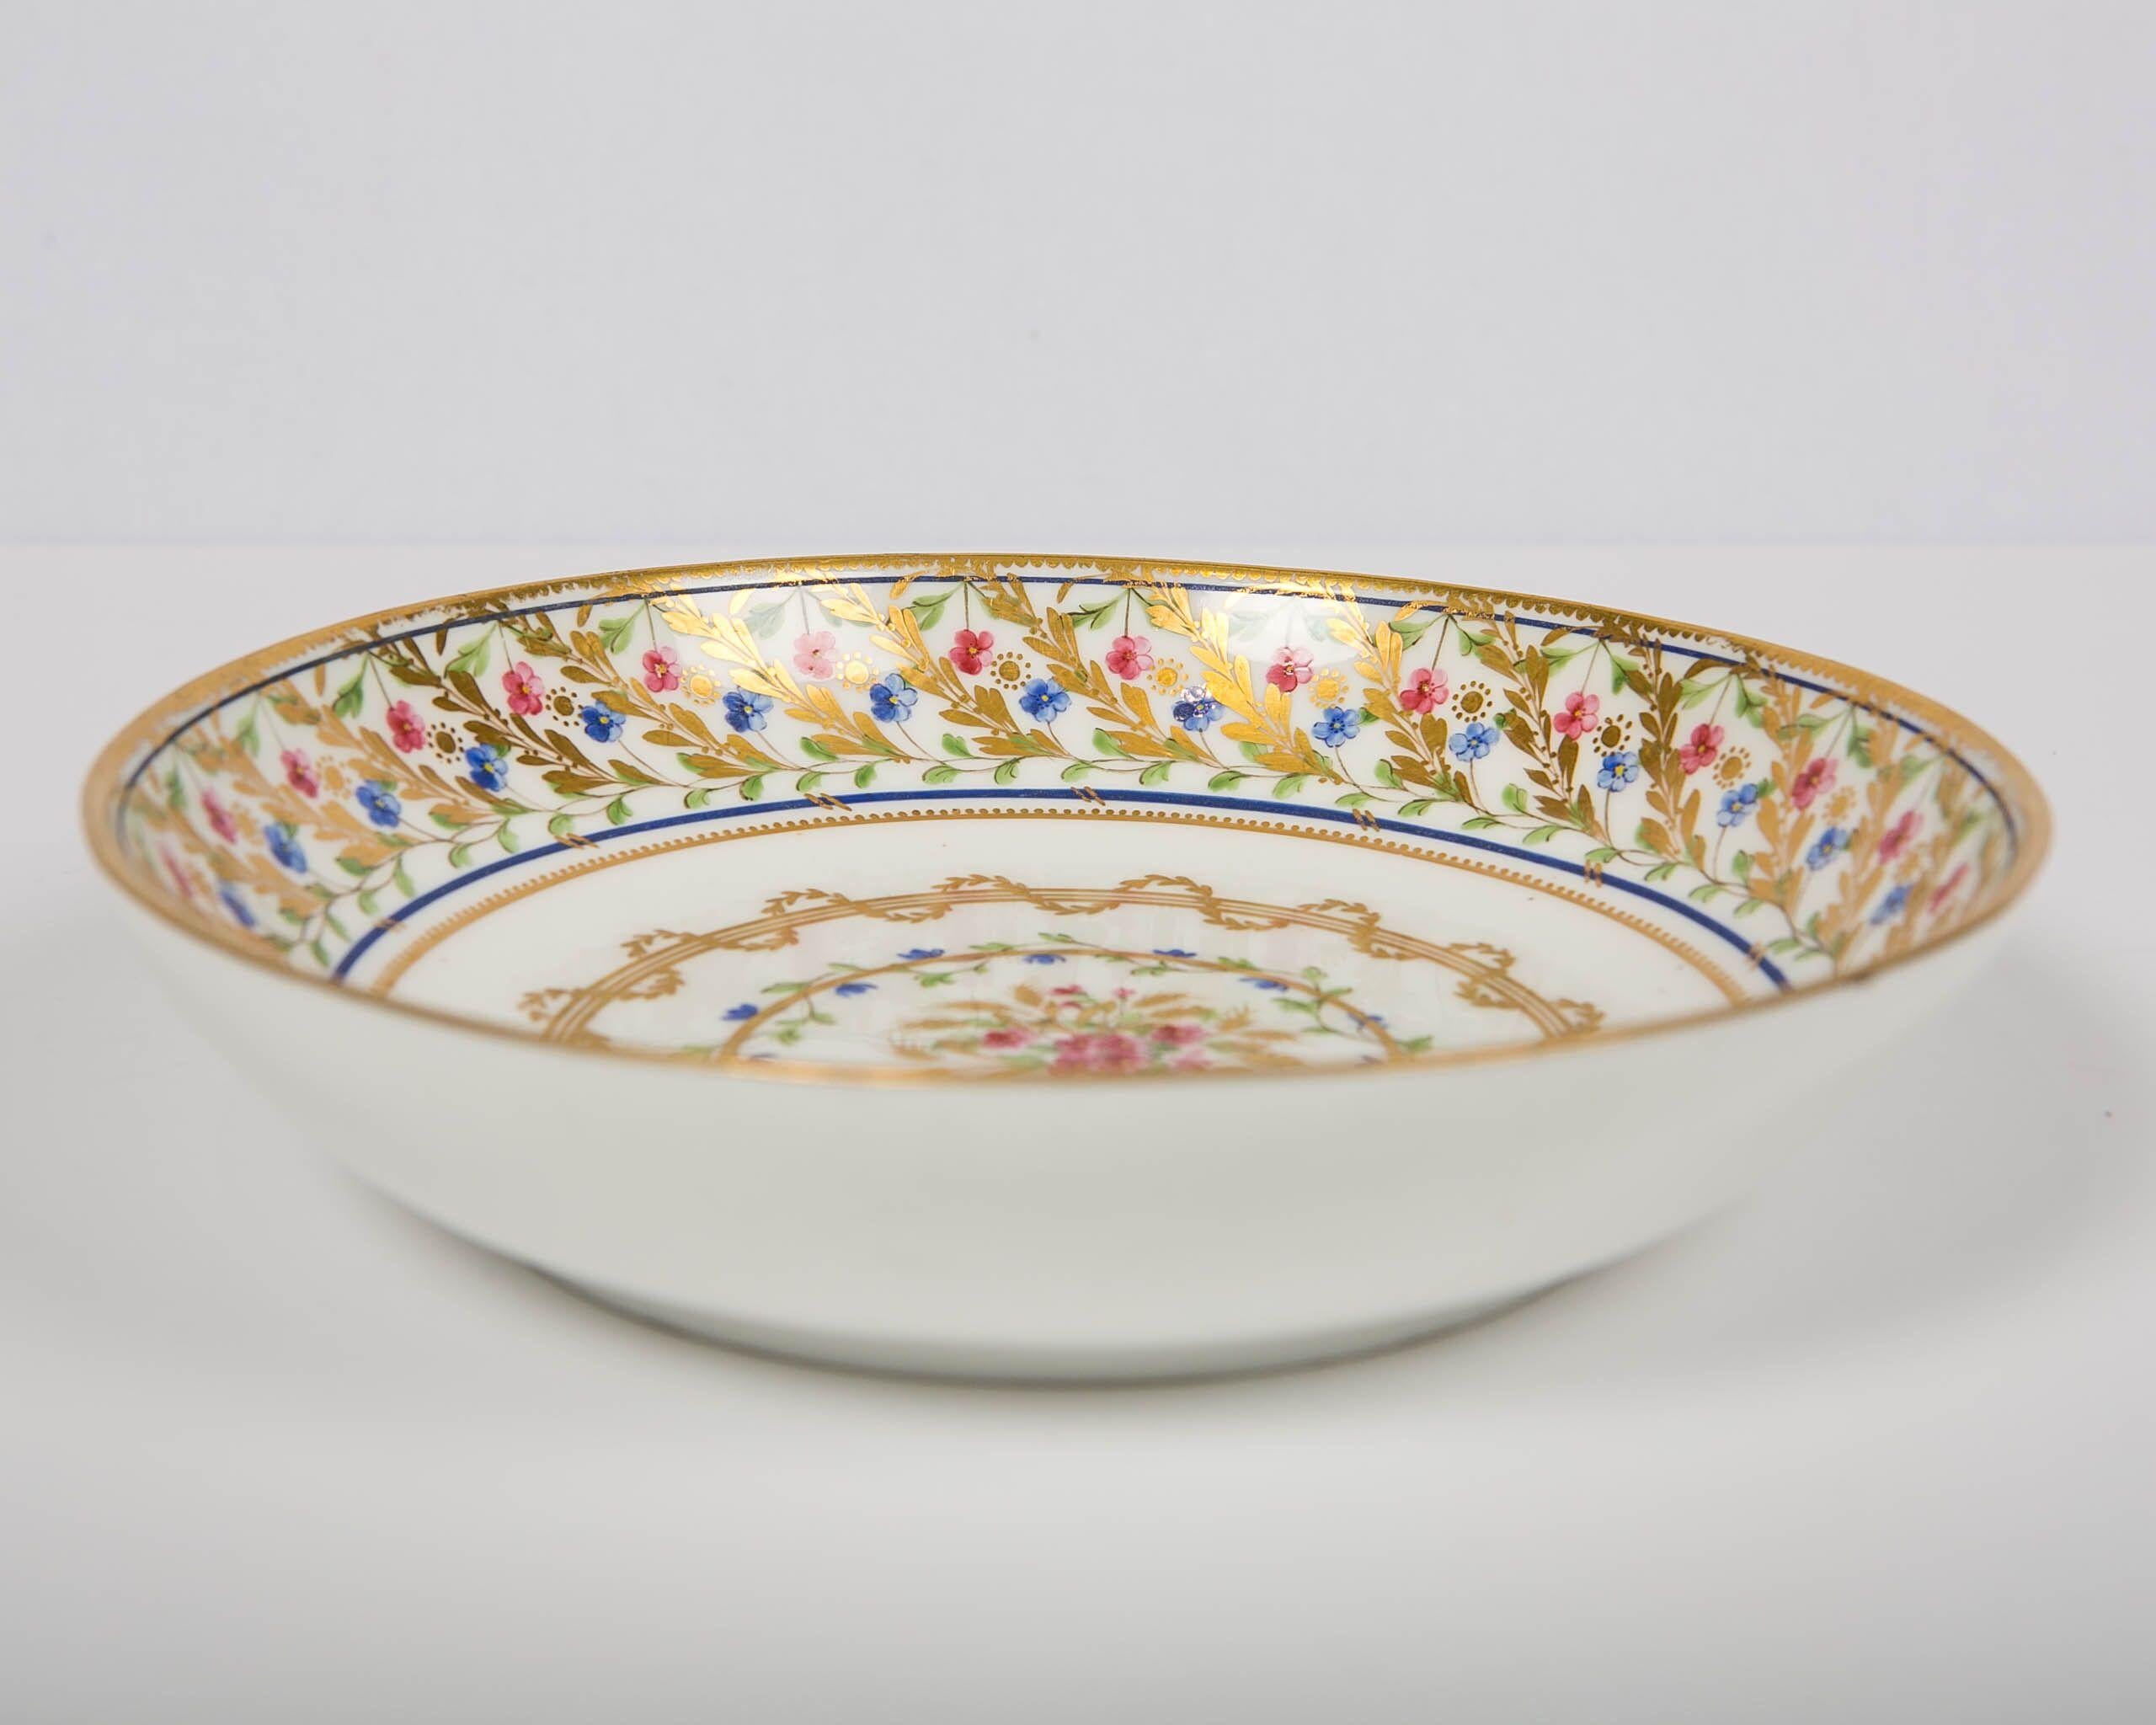 Sèvres Porcelain Dish Made 1793-1798 Marked Painted by D. Massy & Sèvres 1